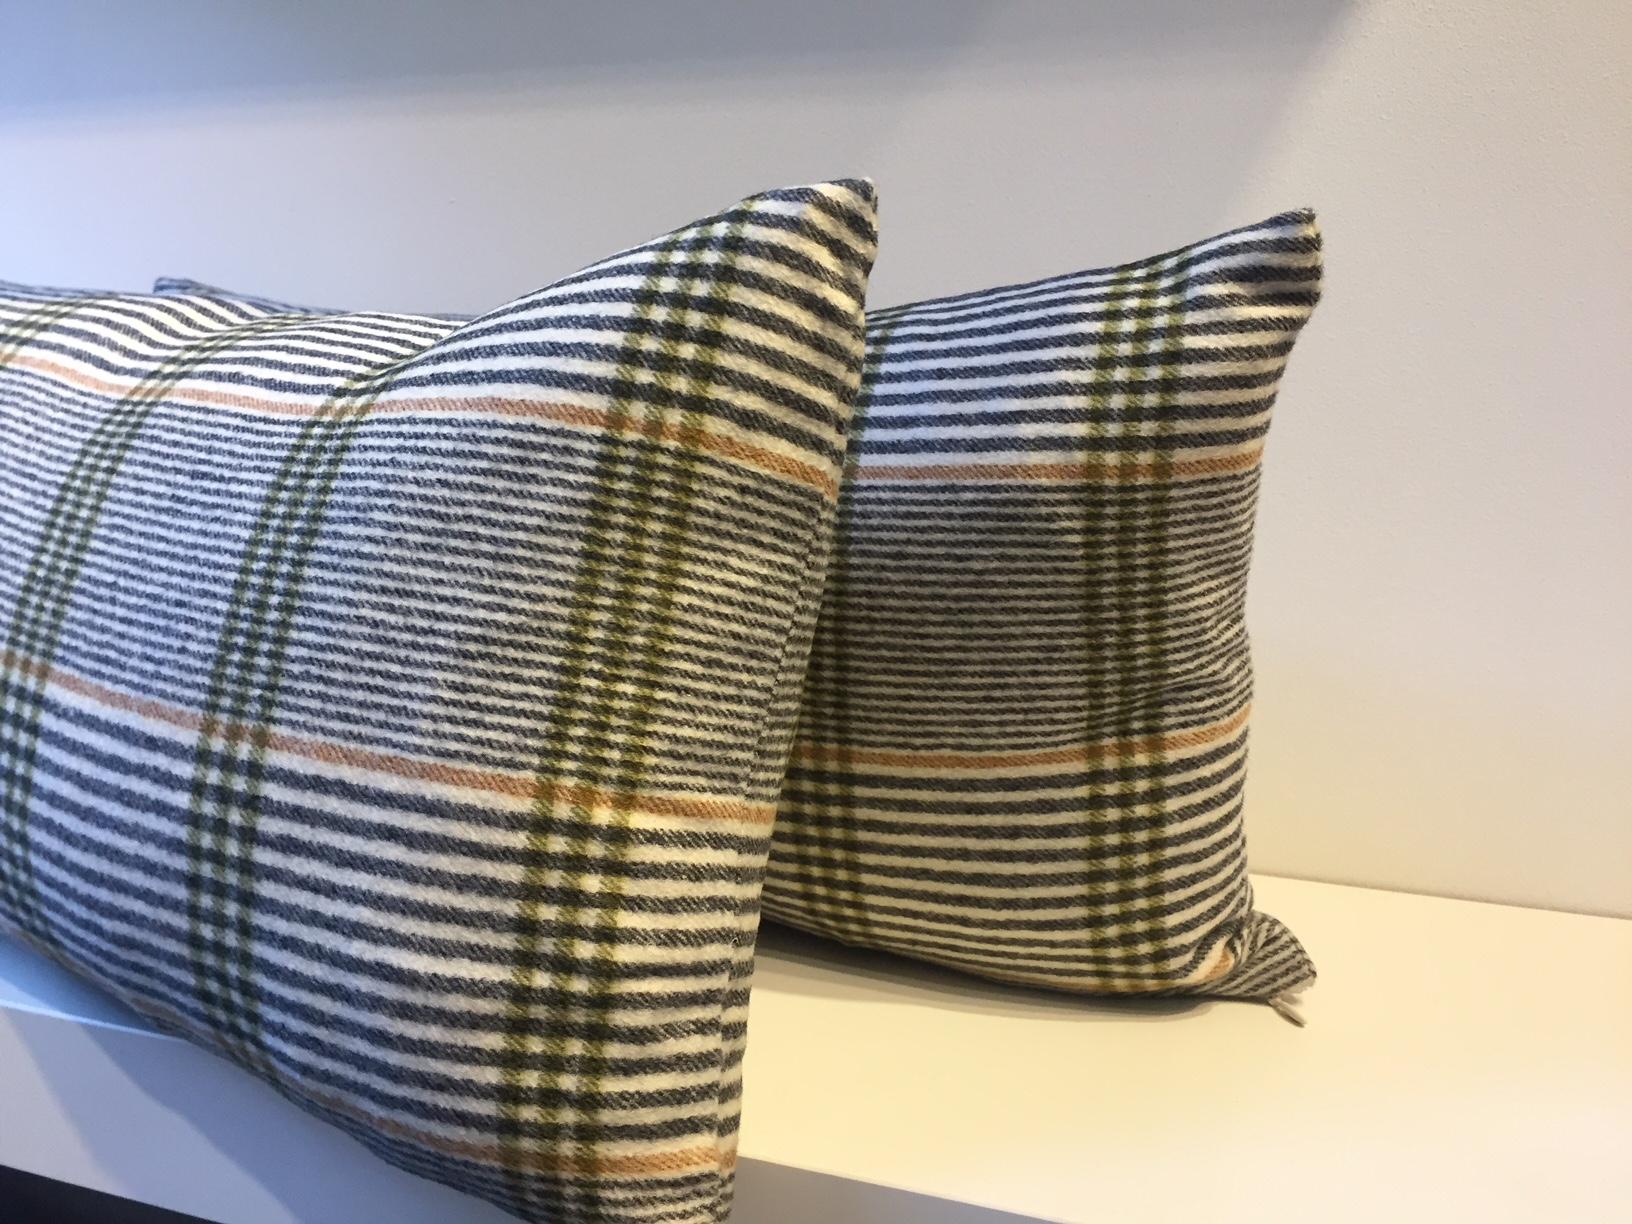 German Barbera Cashmere Cushions Black and Lime Woven Check Pattern on Ivory